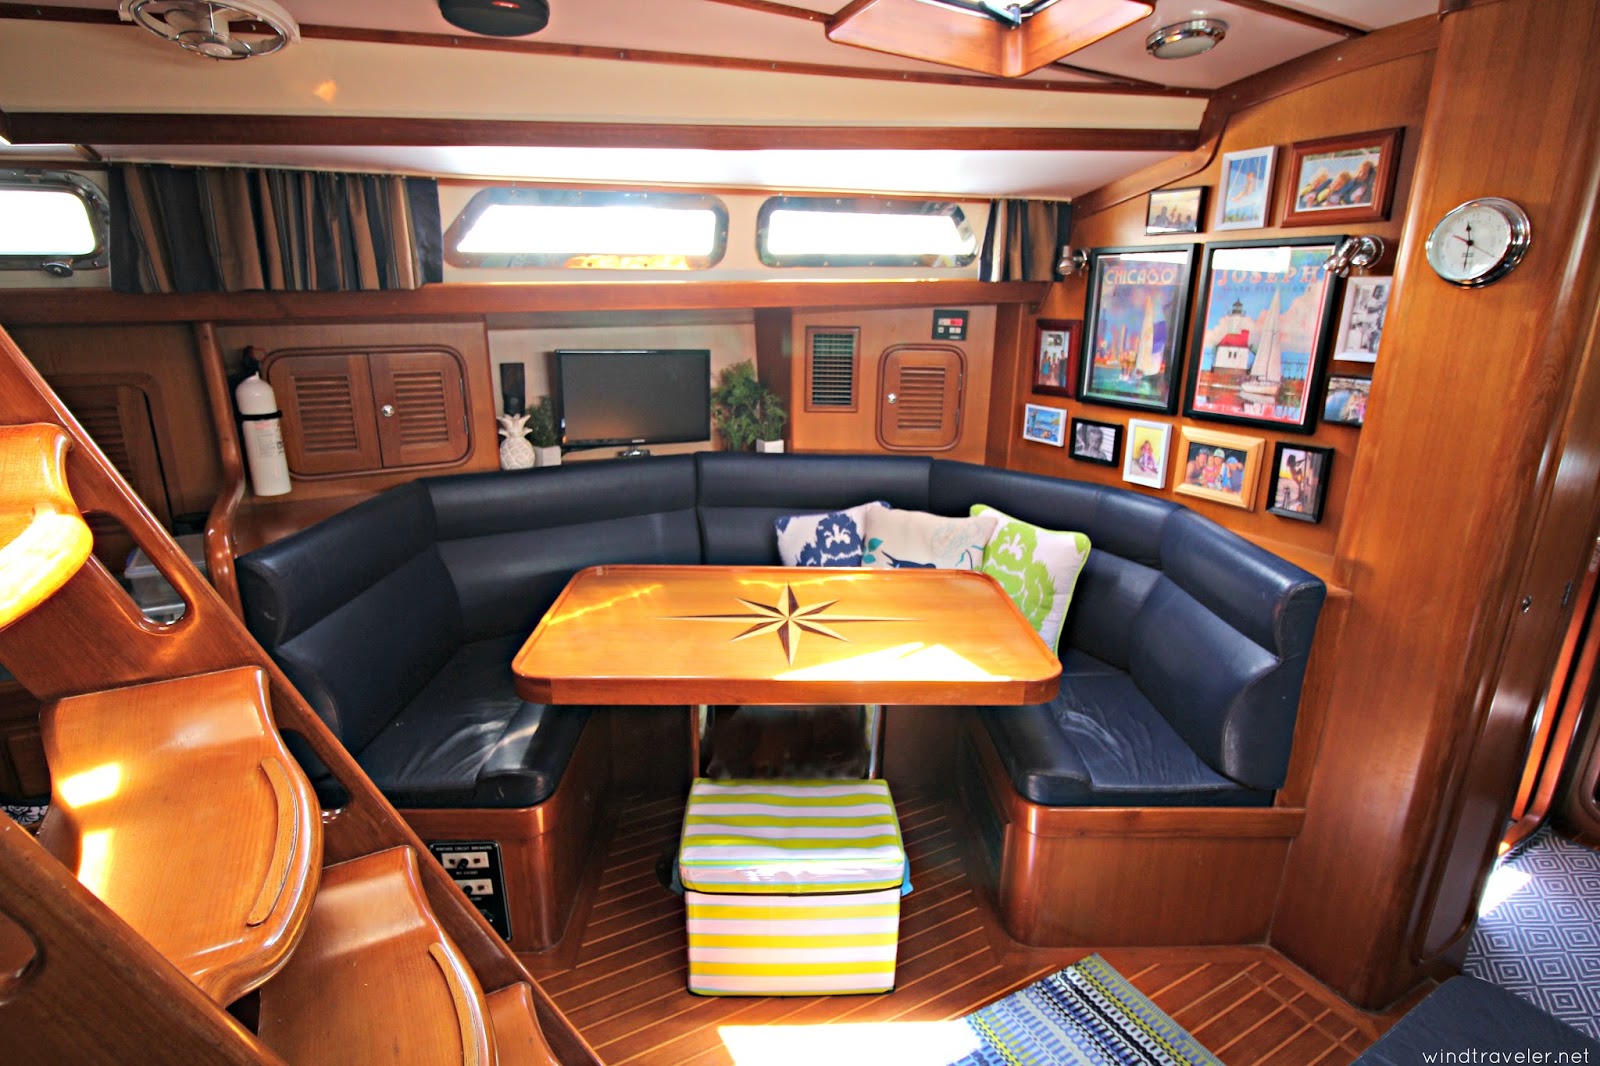 Windtraveler: Decorating a Boat (or Tiny Home): Putting the Fun in